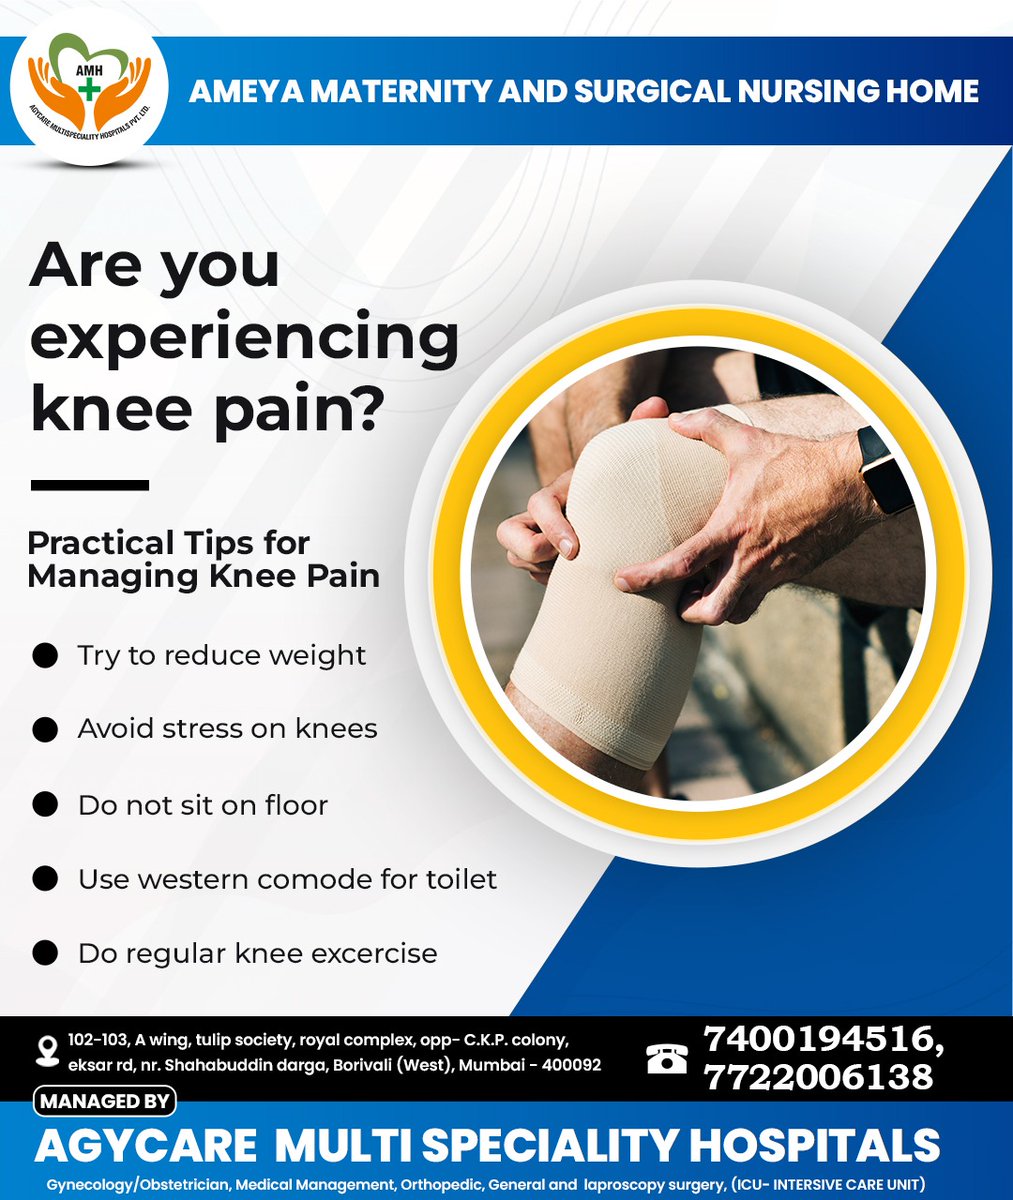 Knee Pain Got You Down? Discover Practical Tips for Finding Relief and Regaining Mobility.

For more enquiry: 074001 94516, 7722006138

#KneePainRelief #ManageKneePain #JointHealth #MobilityMatters #PainManagement #HealthyKnees #WellnessTips #agycaremultispecialityhospital